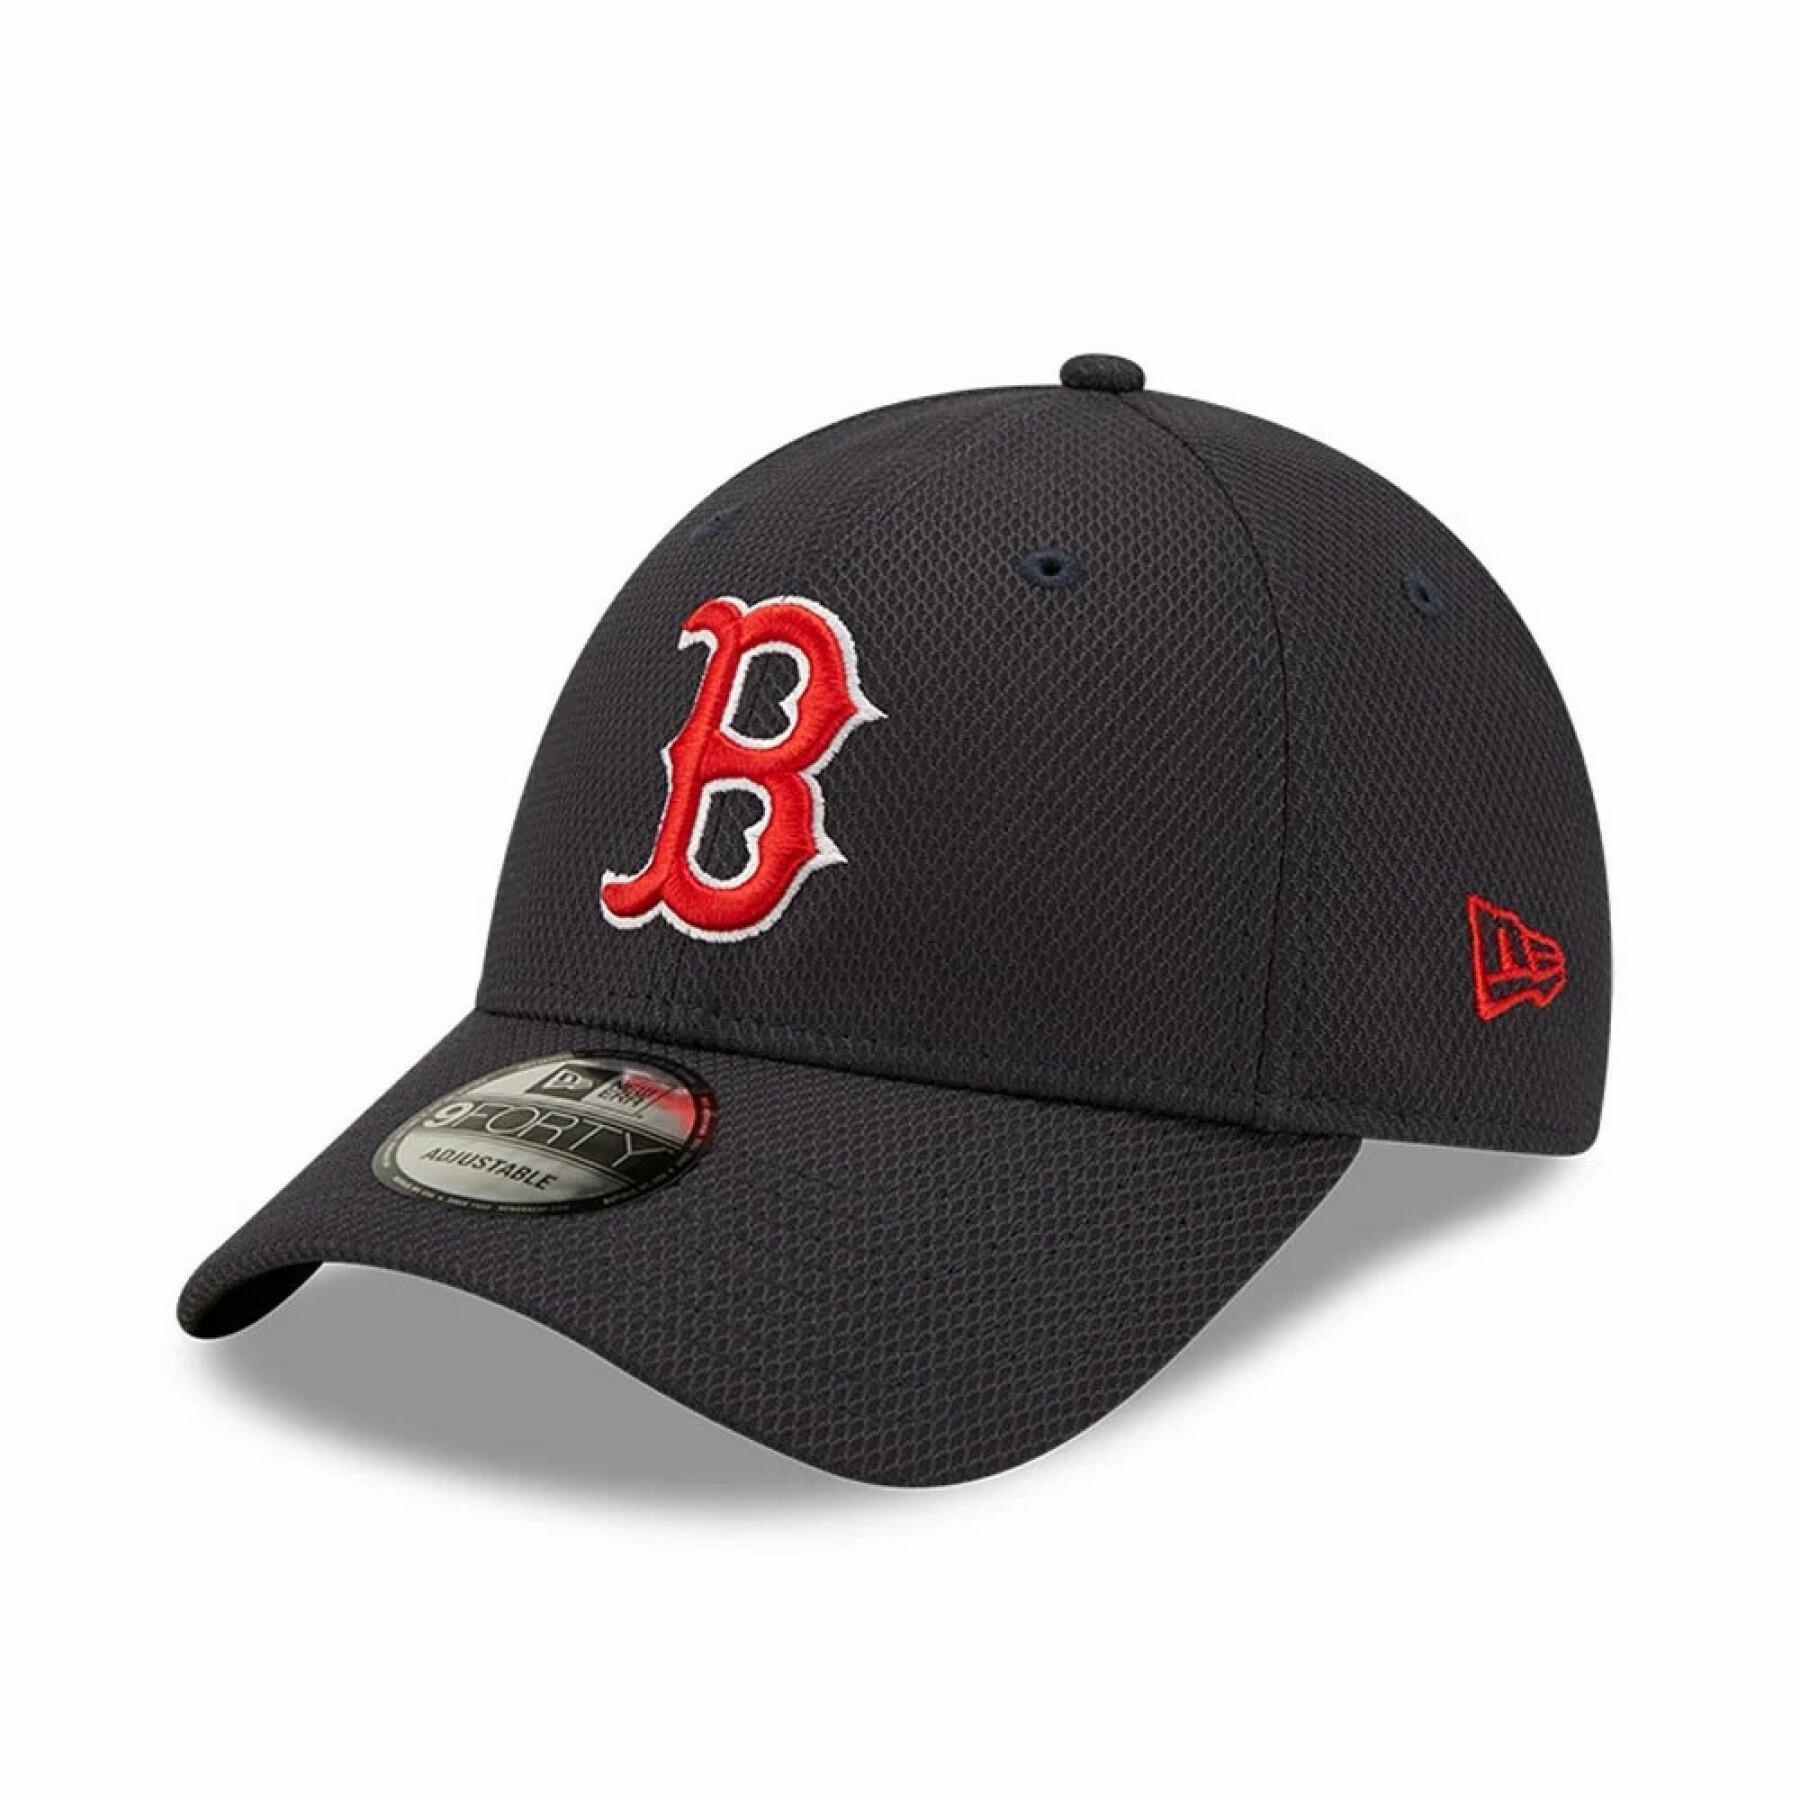 Gorra 9forty Boston Red Sox